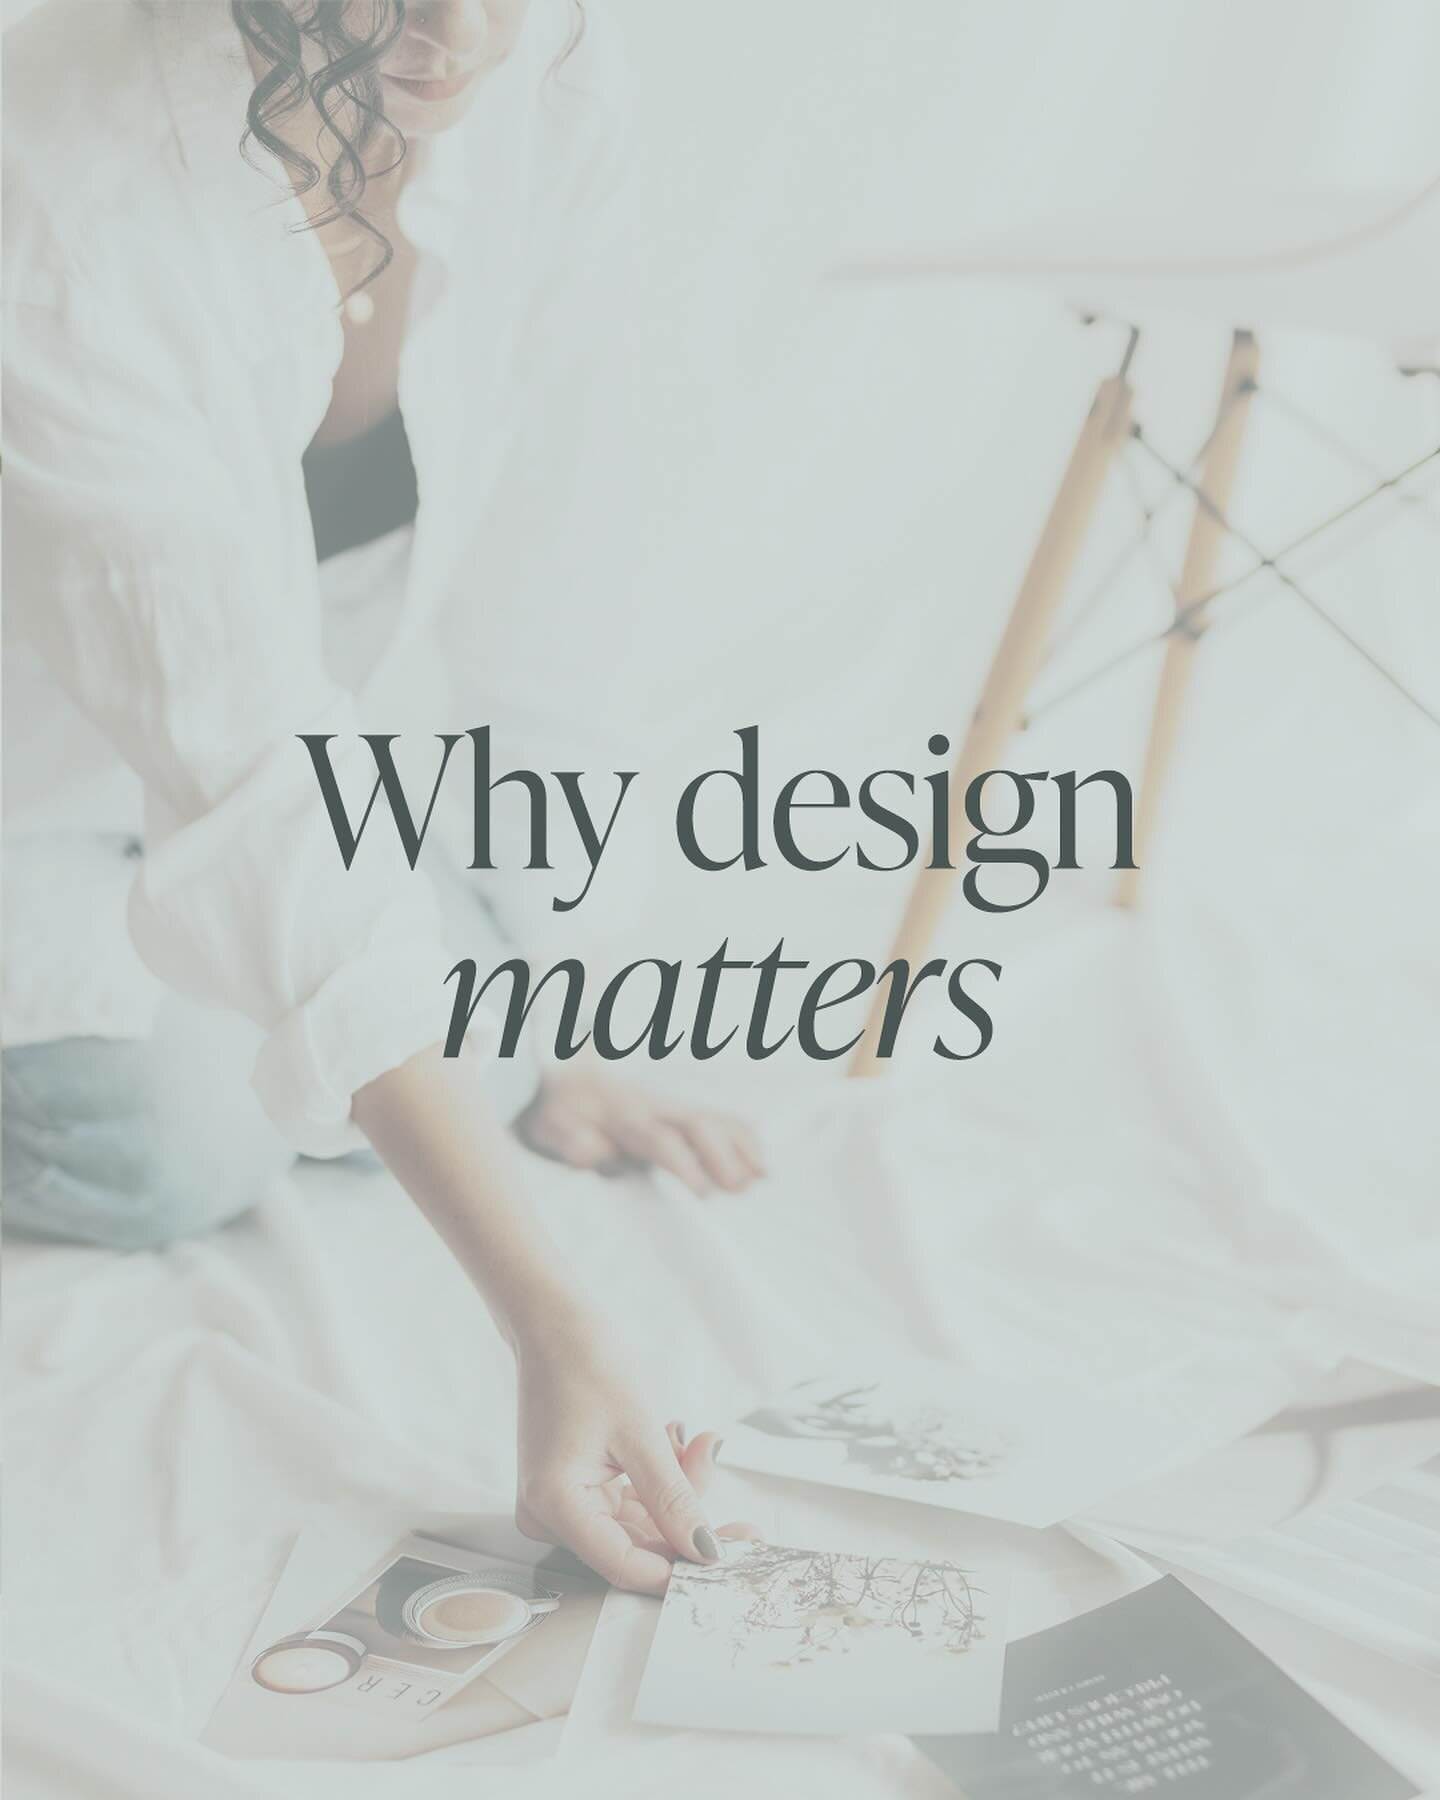 Design is about so much more than making things look pretty. Intentional design has the power to evoke deep emotion, cultivate connection, and create a safe space that welcomes in your community. It&rsquo;s a silent yet profound language that must be